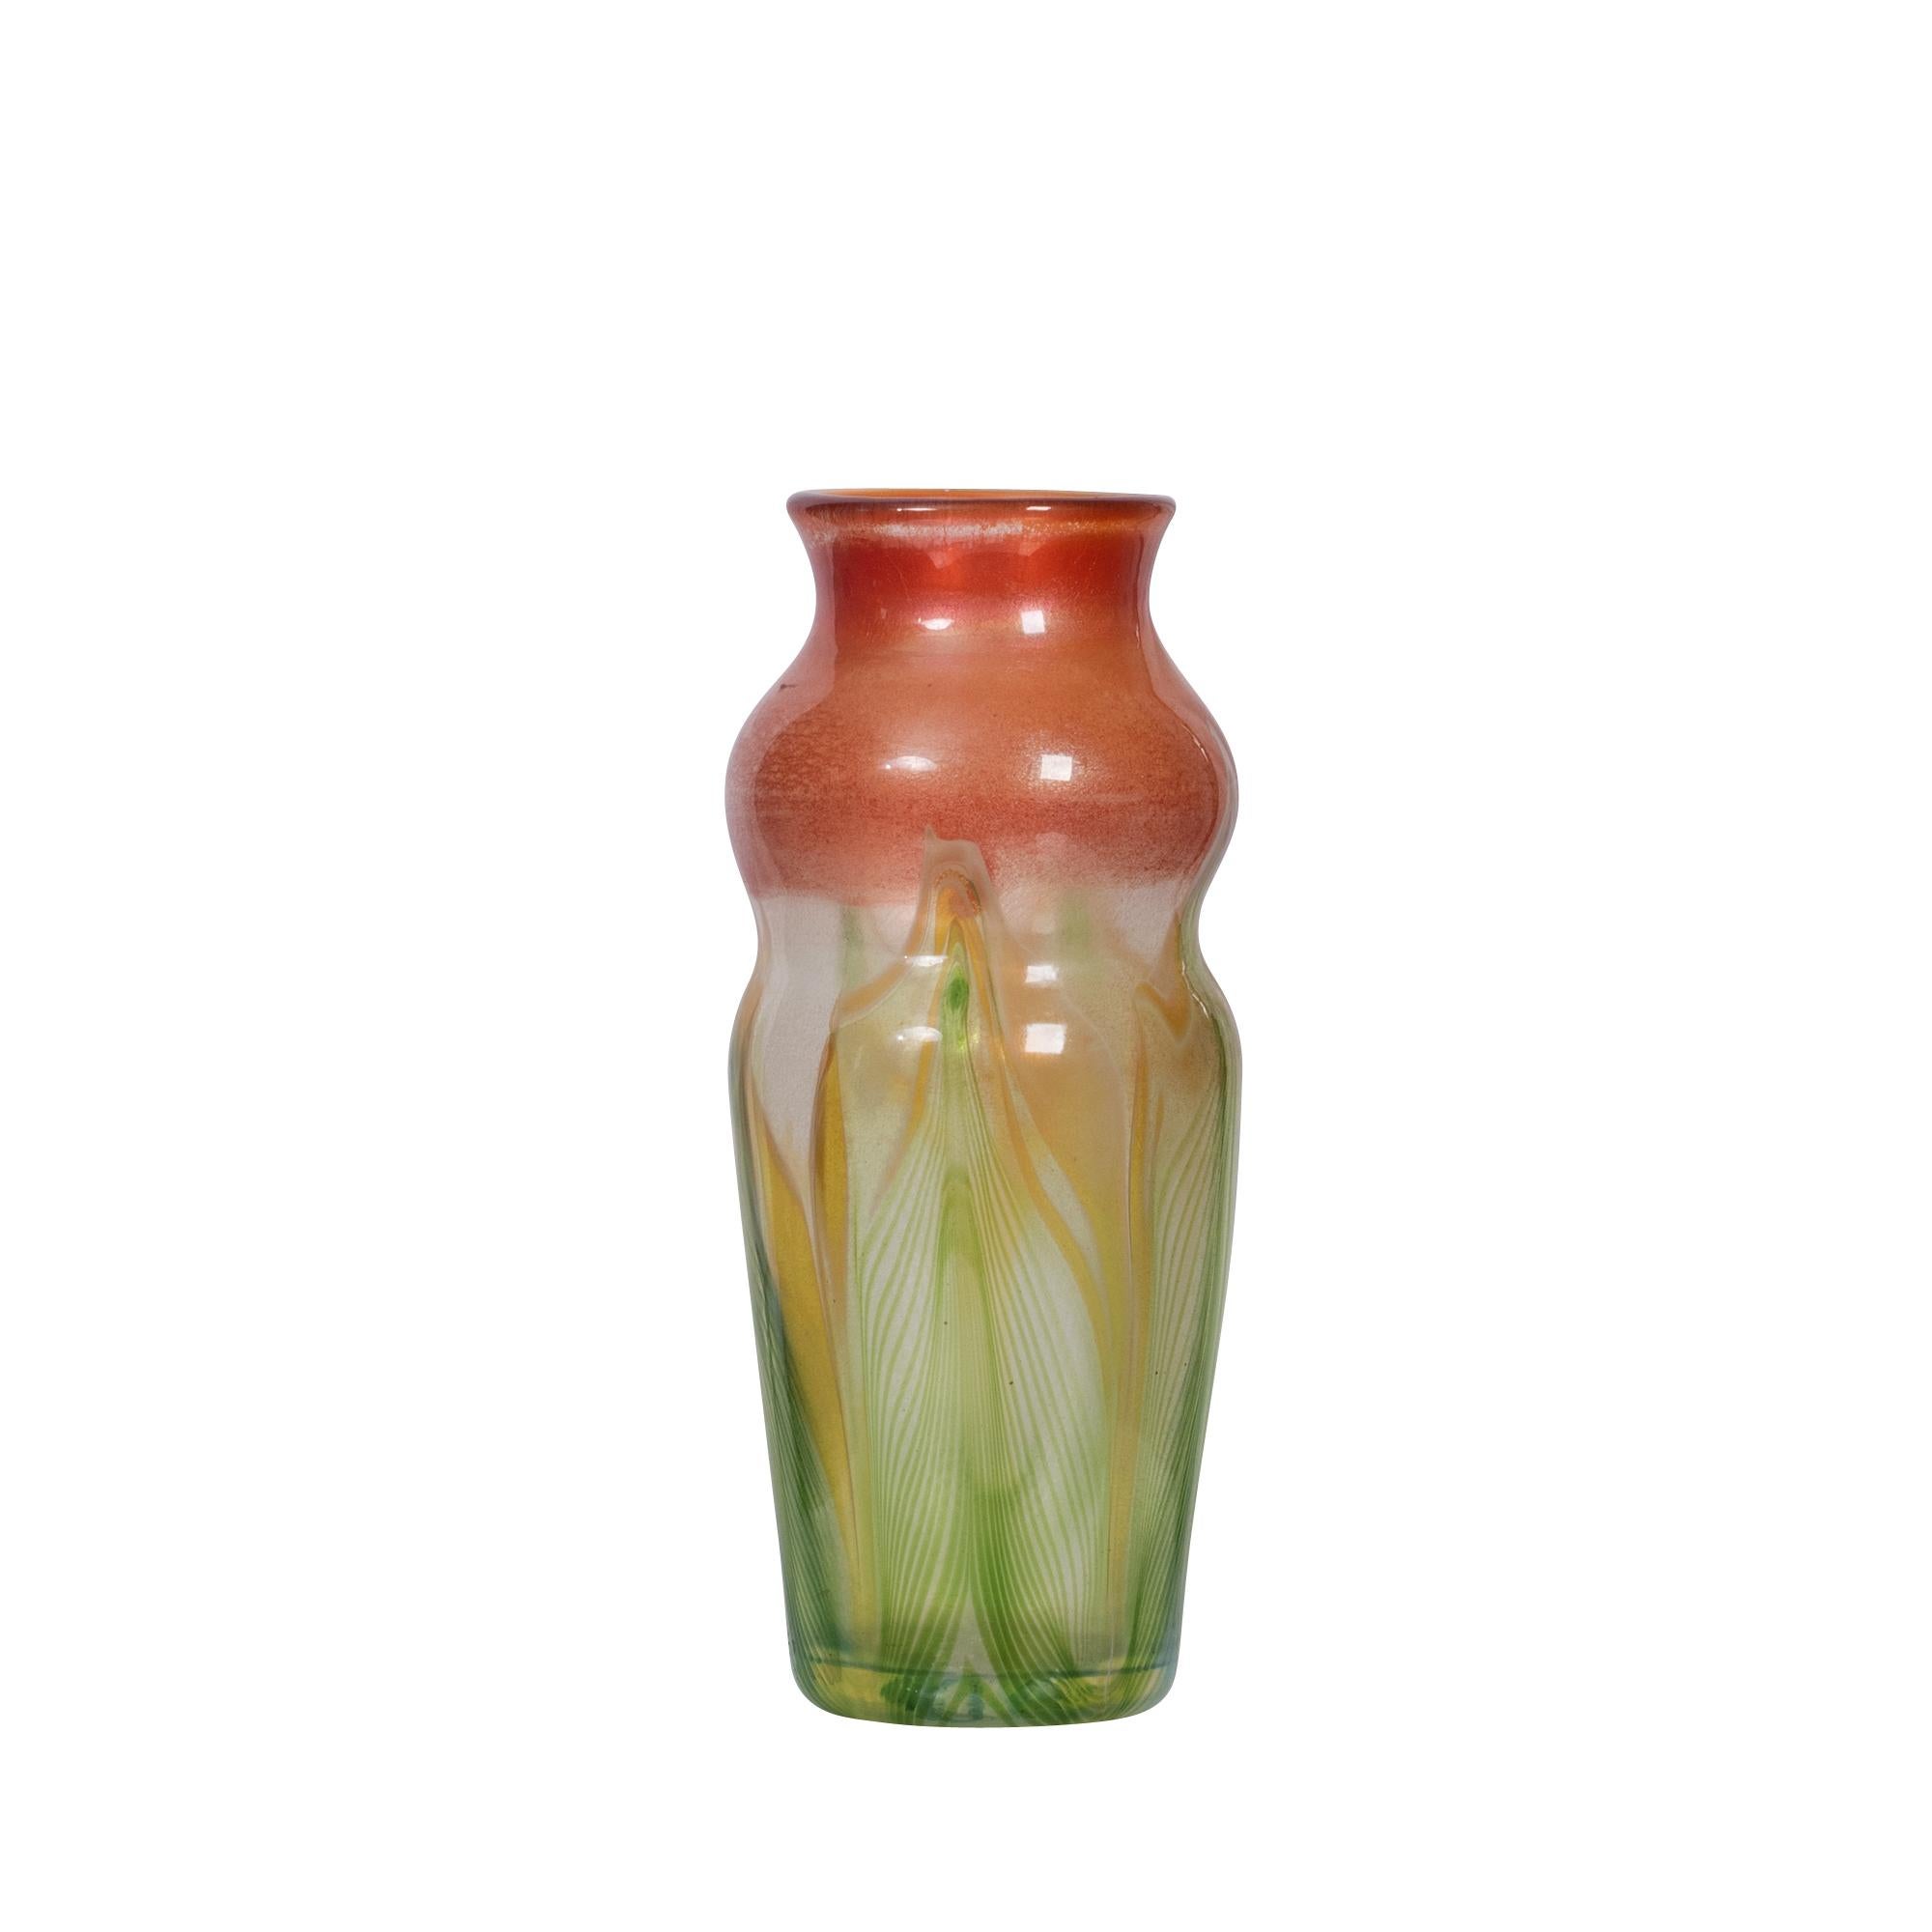 Tiffany Studios Decorated Favrile Glass Cabinet Vase In Good Condition For Sale In West Palm Beach, FL